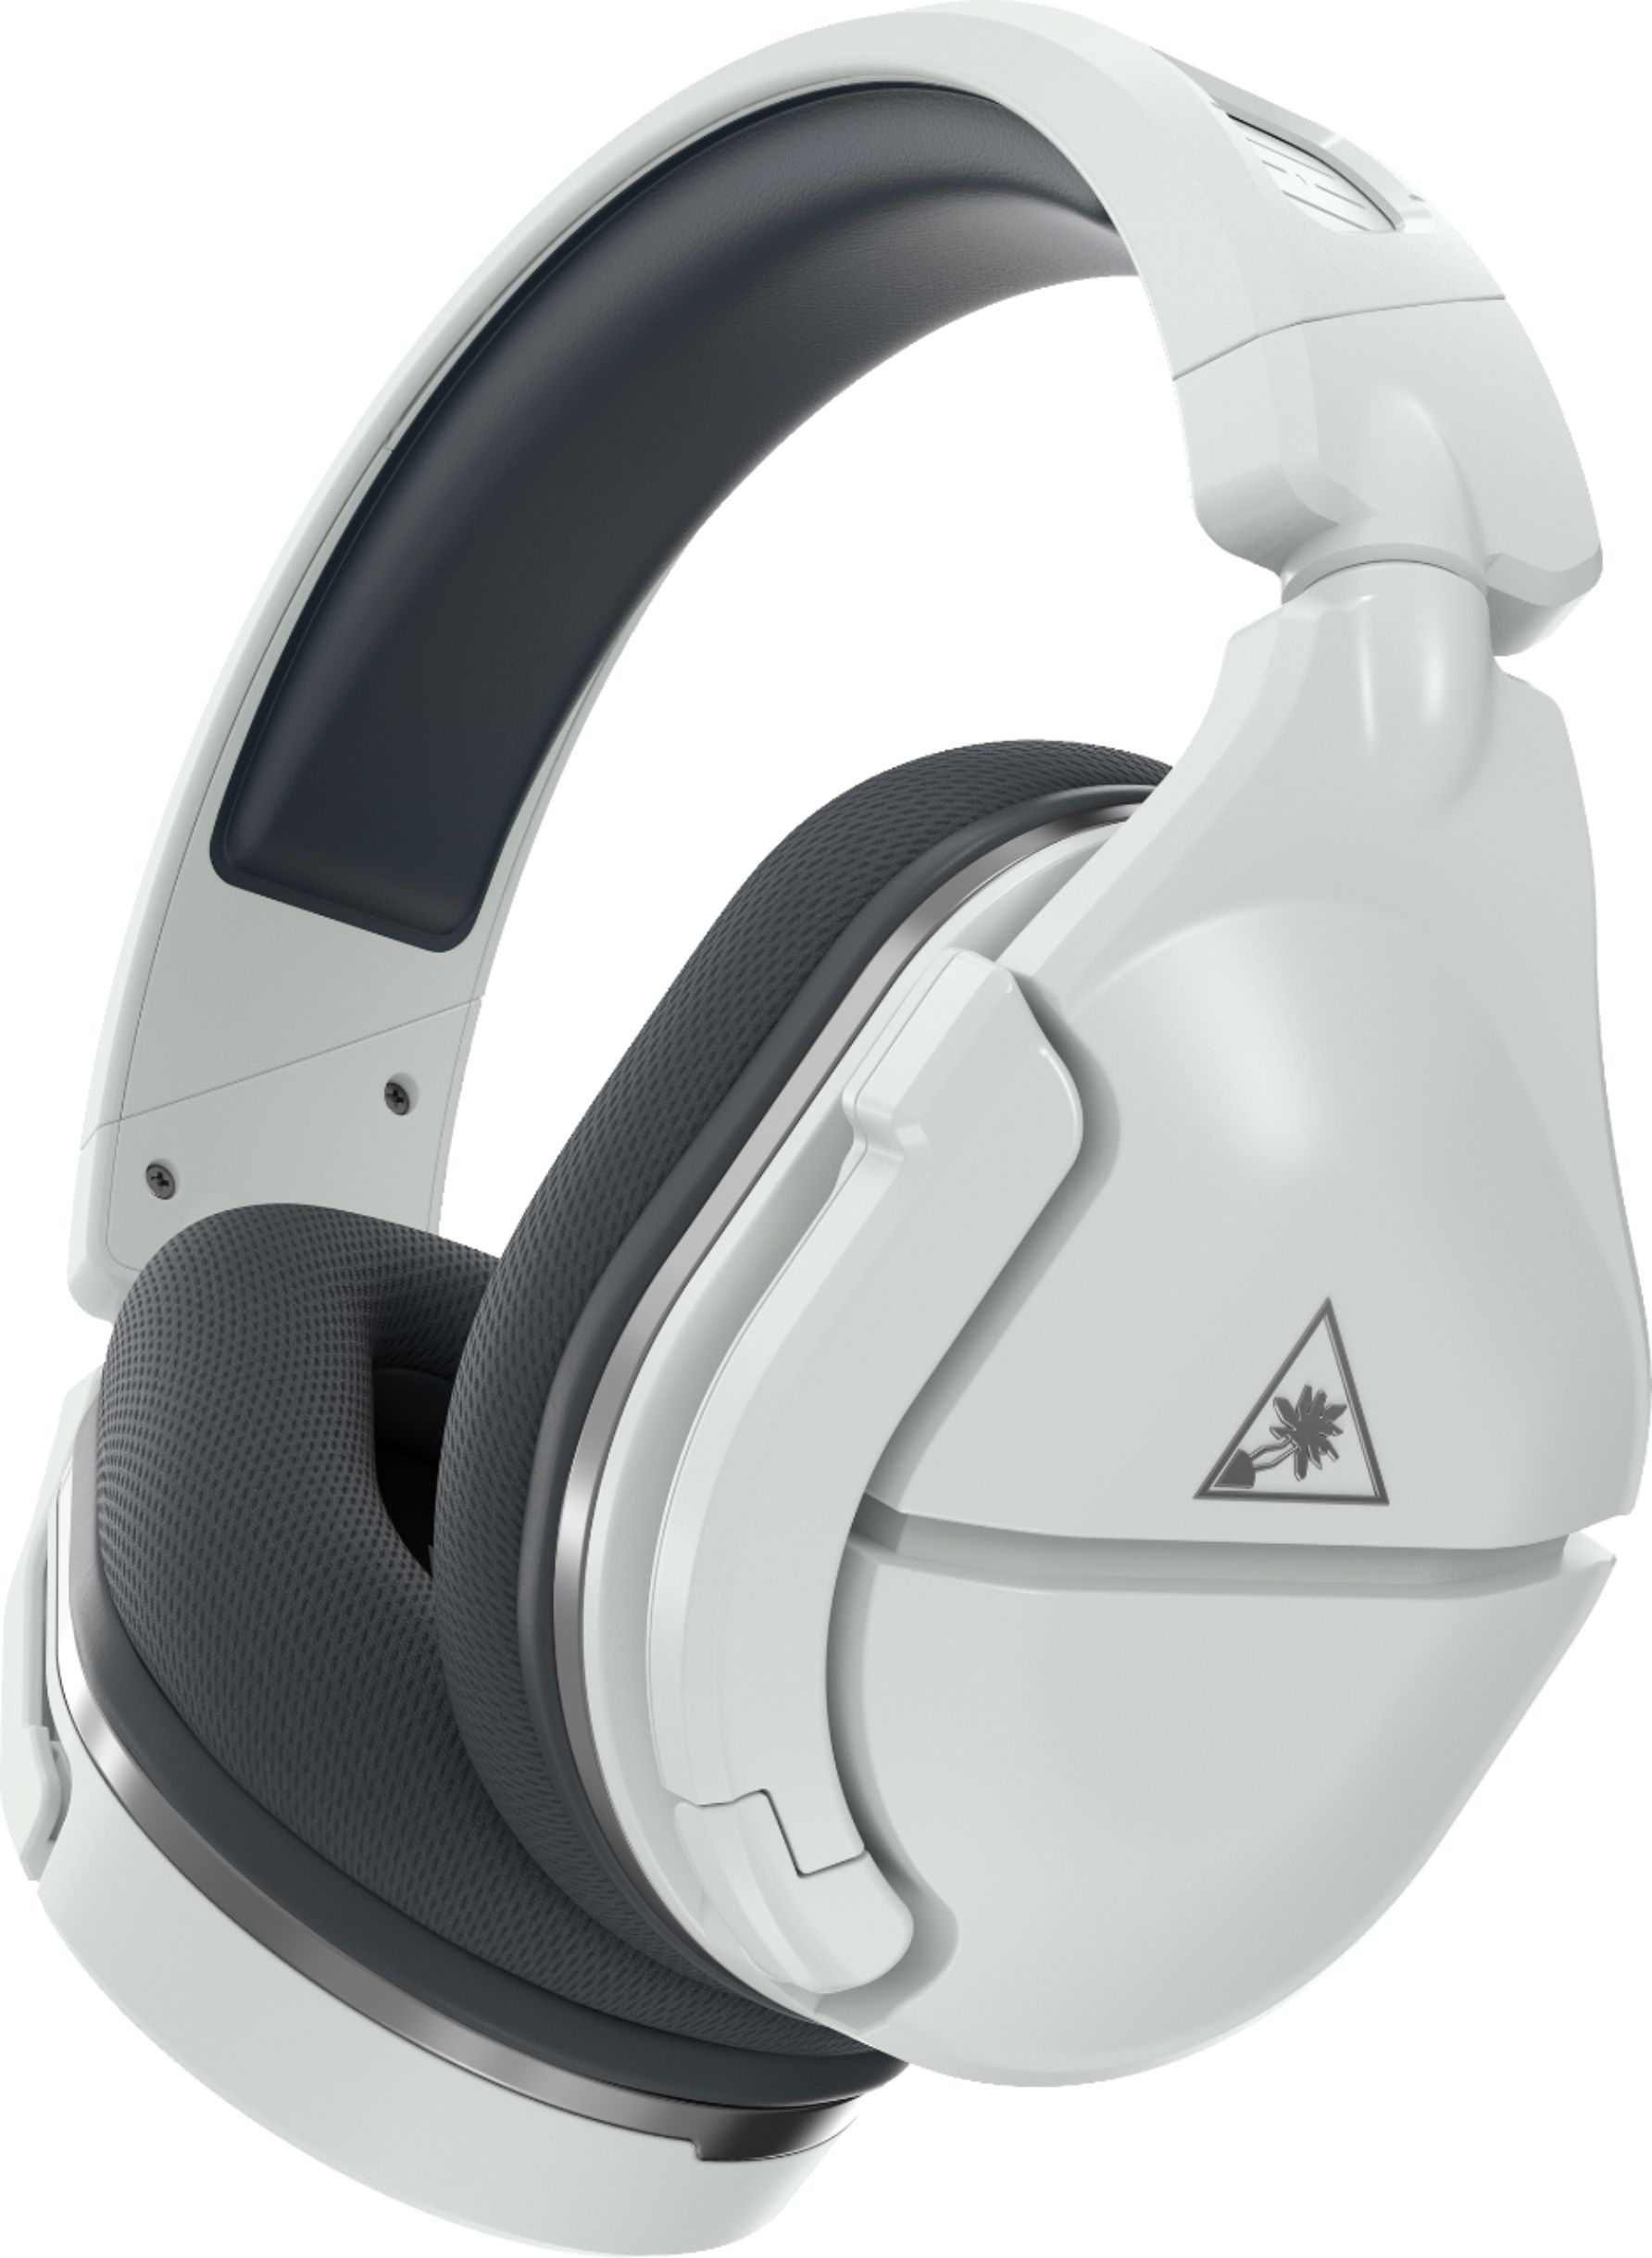 silver ps4 headset